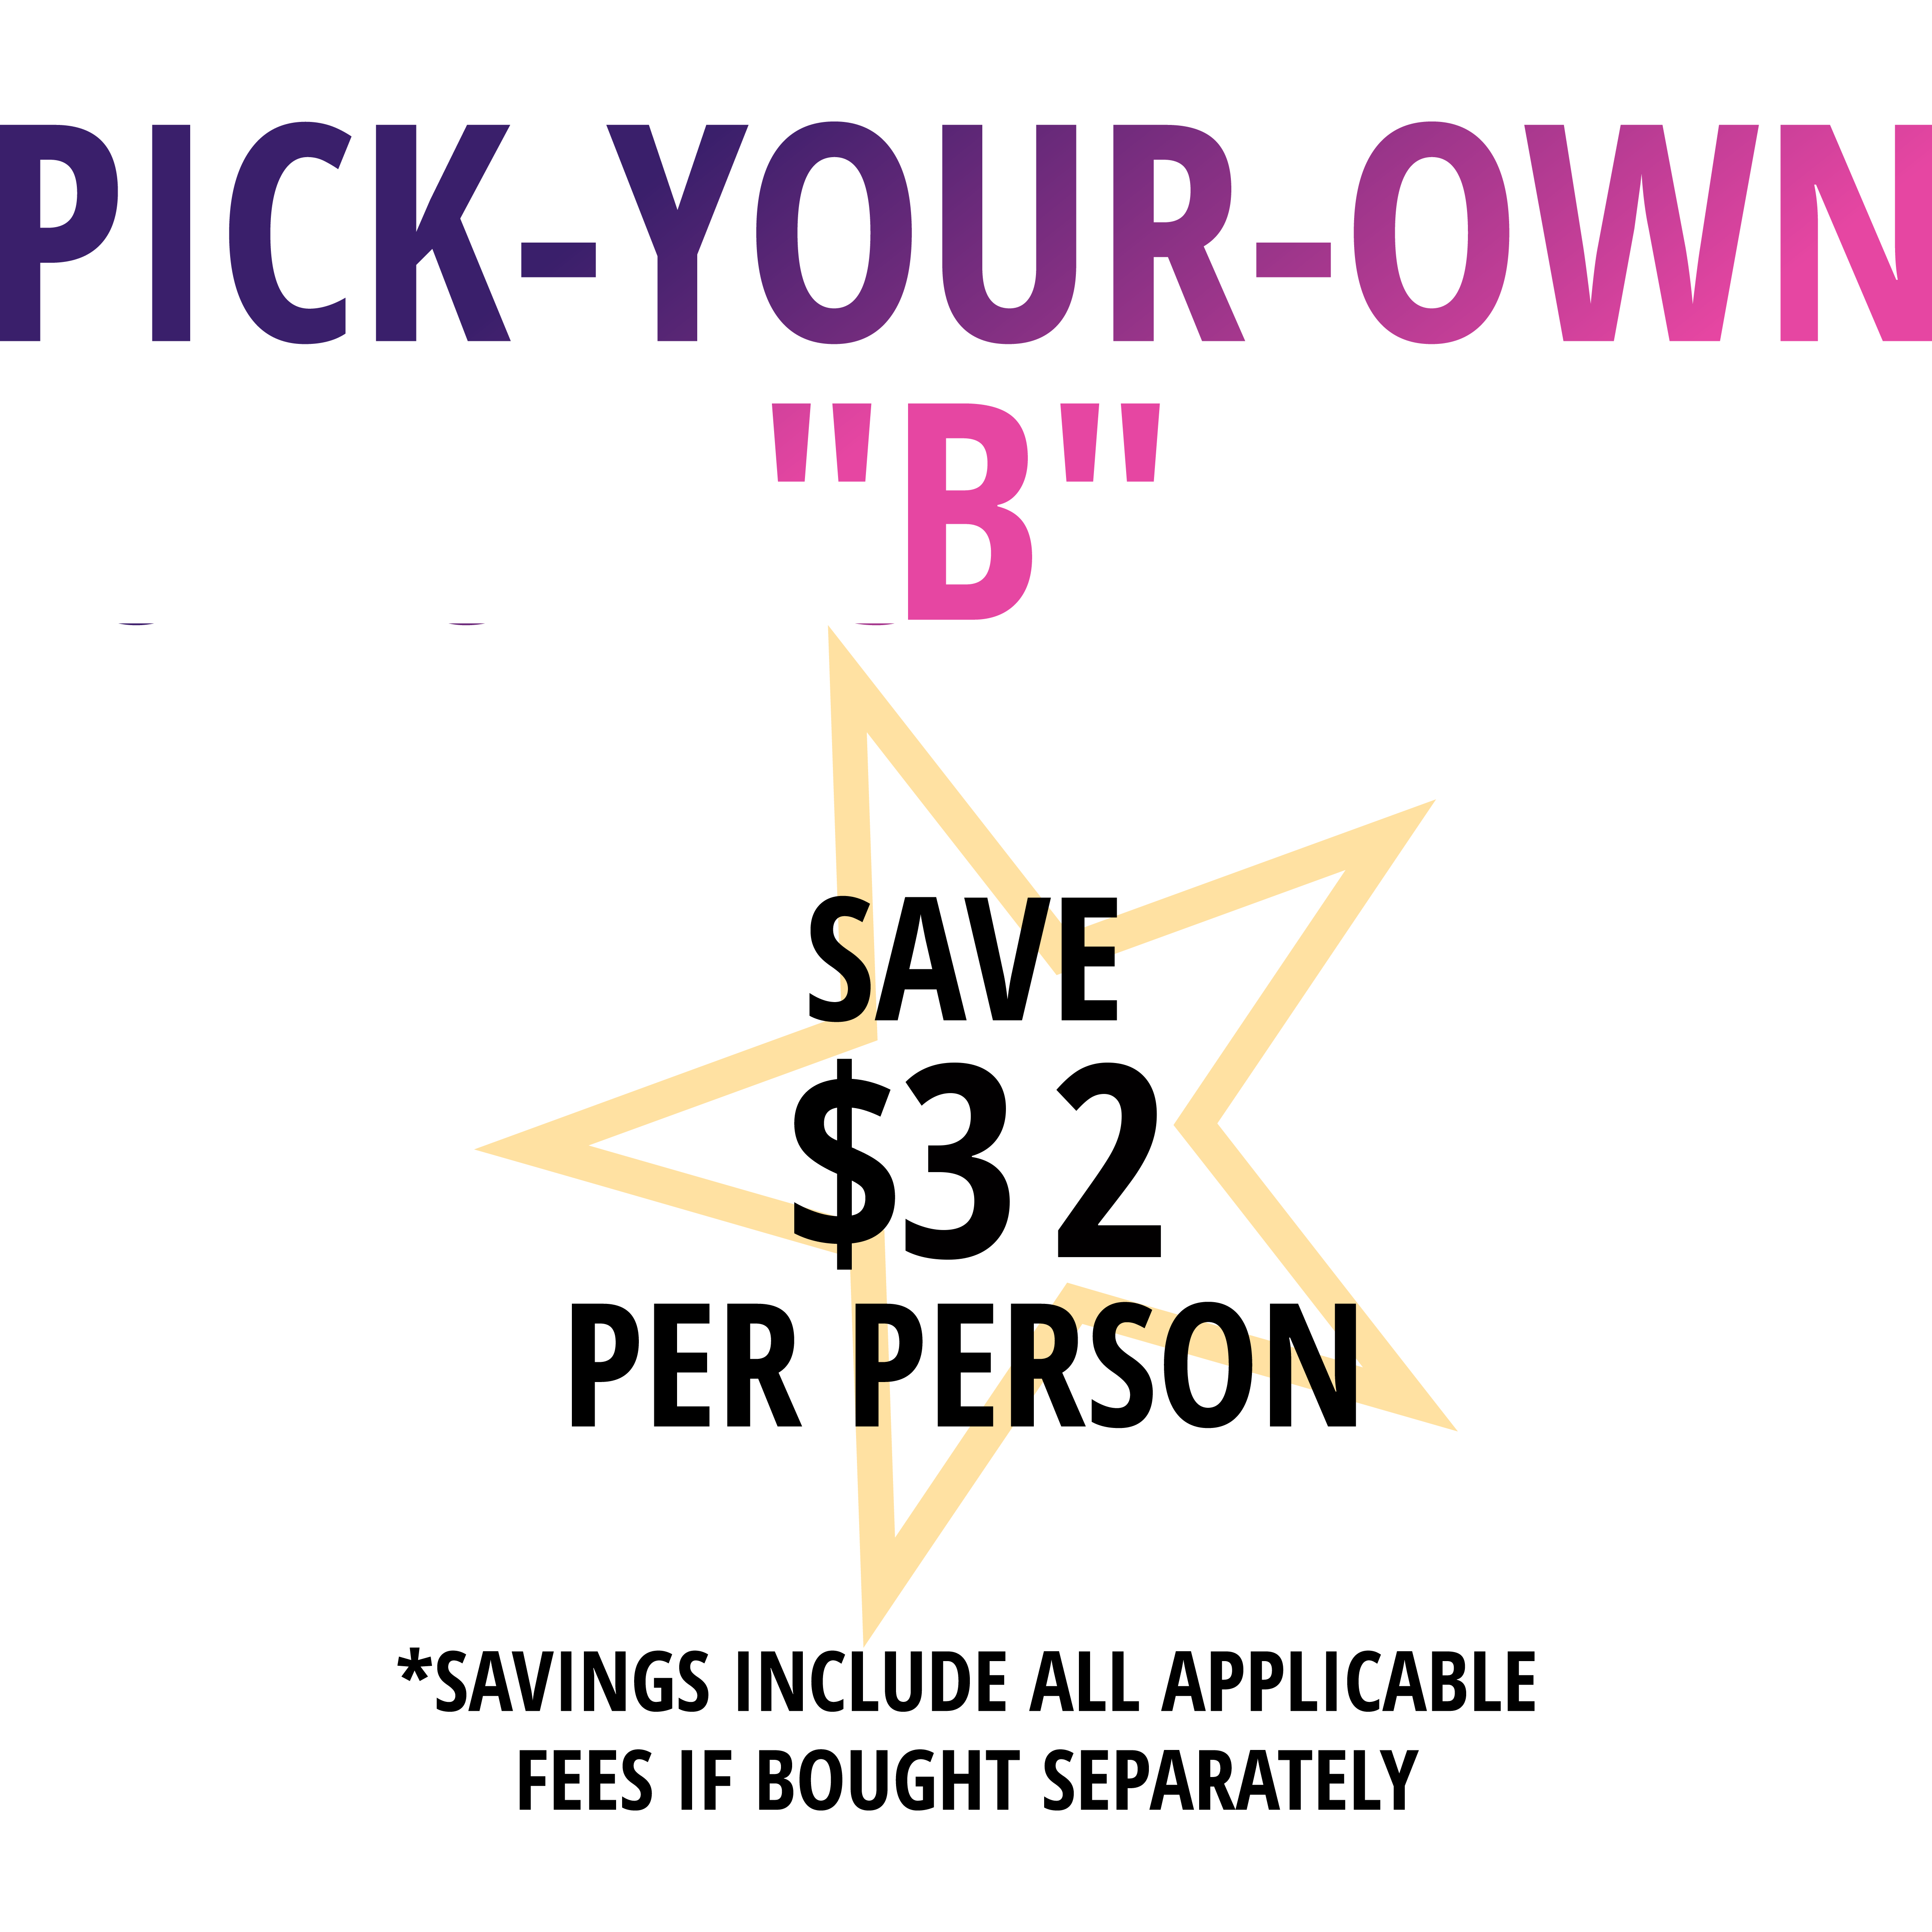 pick-your-own-B-1